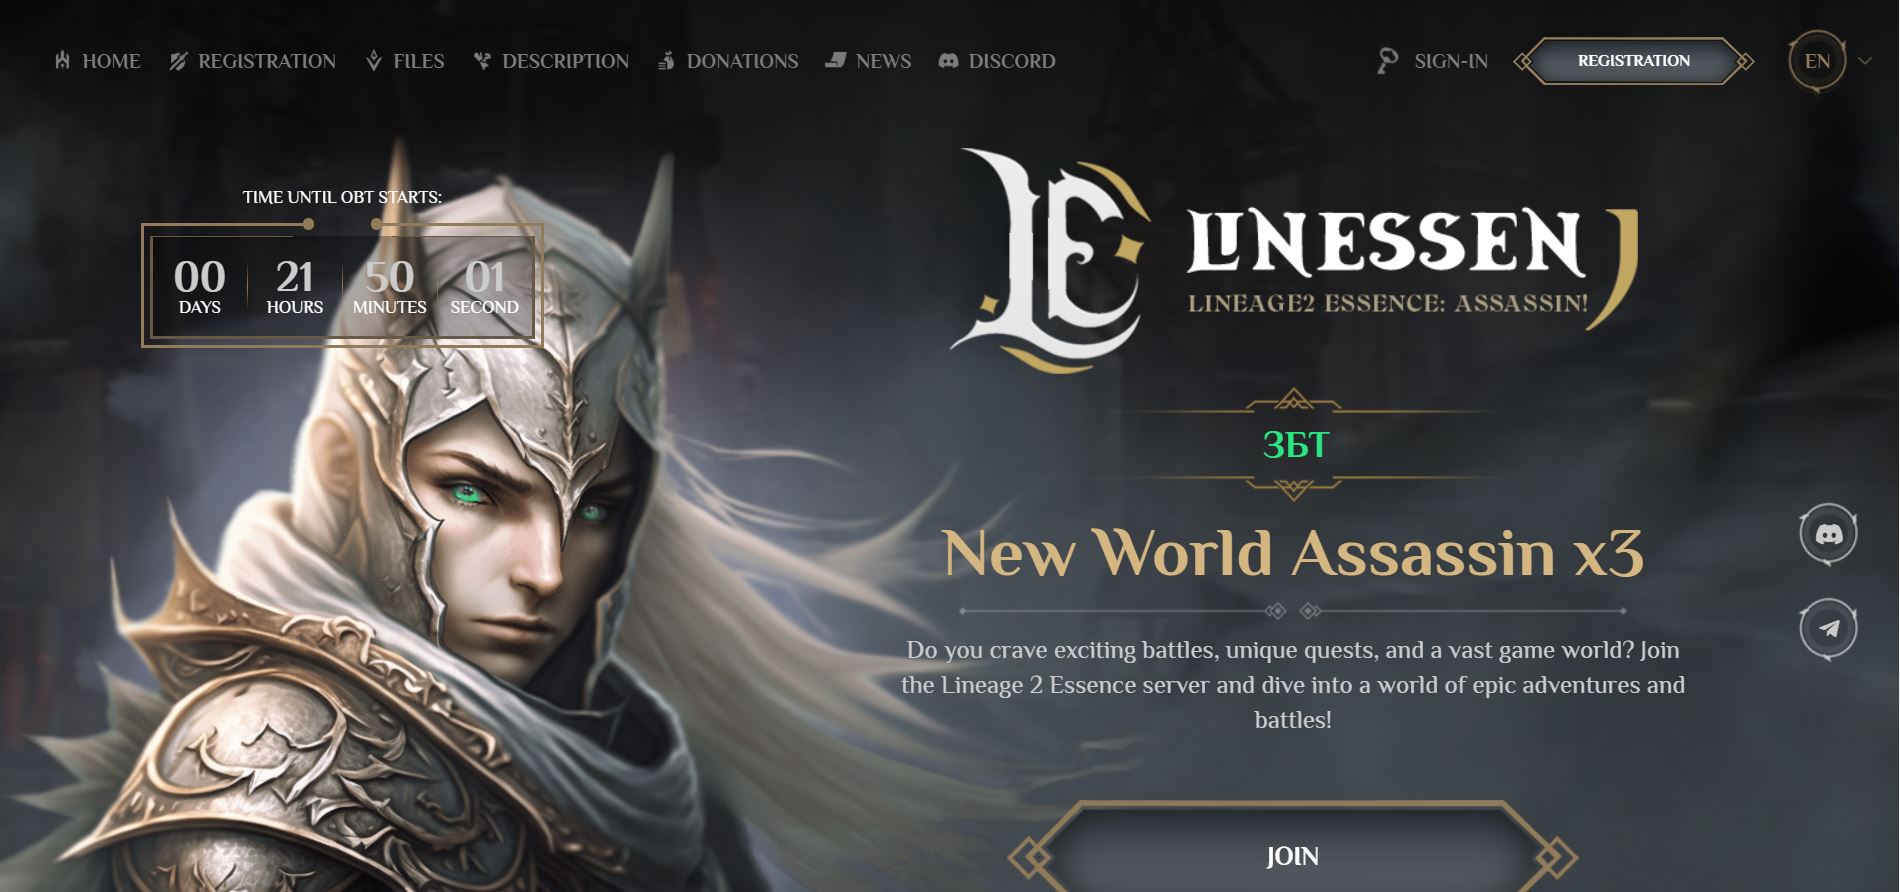 🌟 Linessen.com Essence x3: Explore New Horizons in the World of Lineage 2! 🚀✨